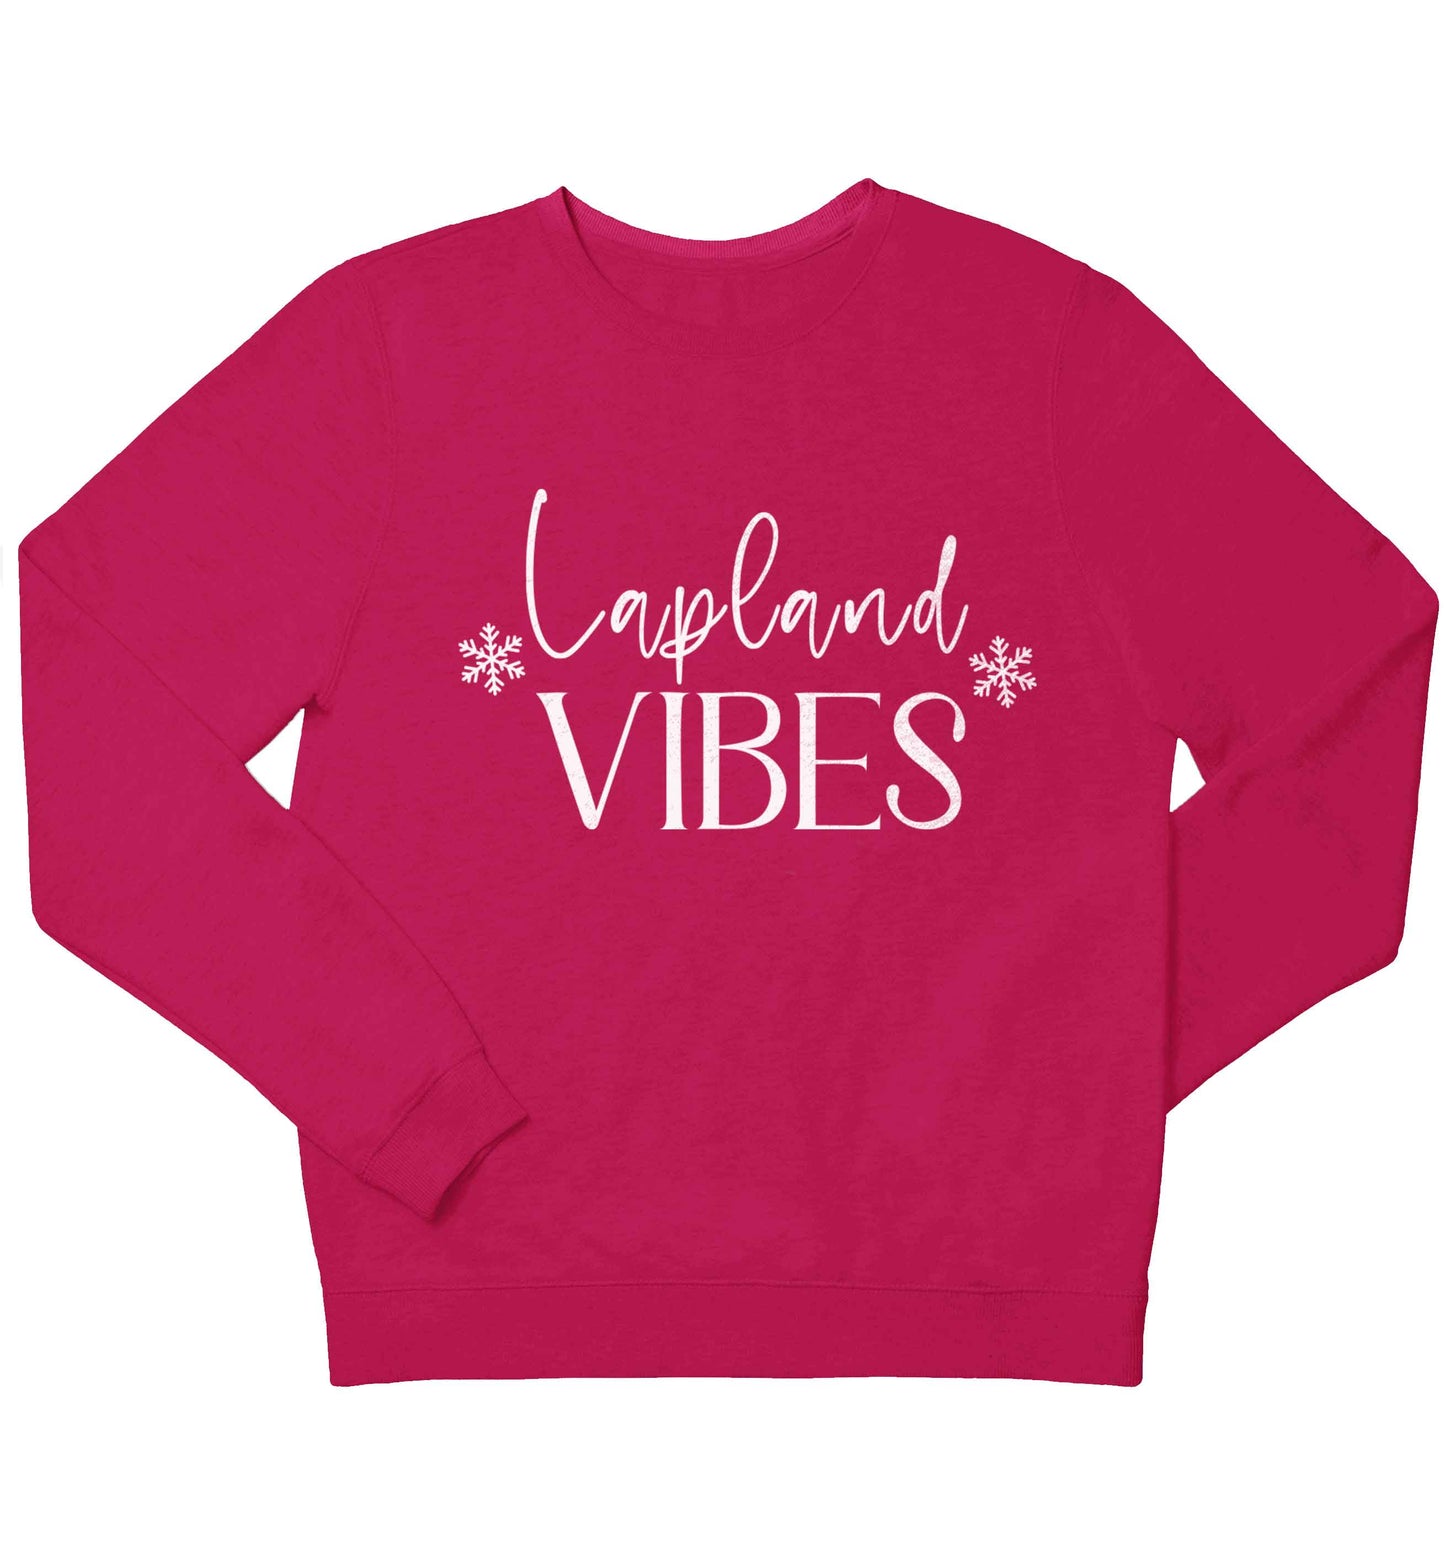 Lapland vibes children's pink sweater 12-13 Years